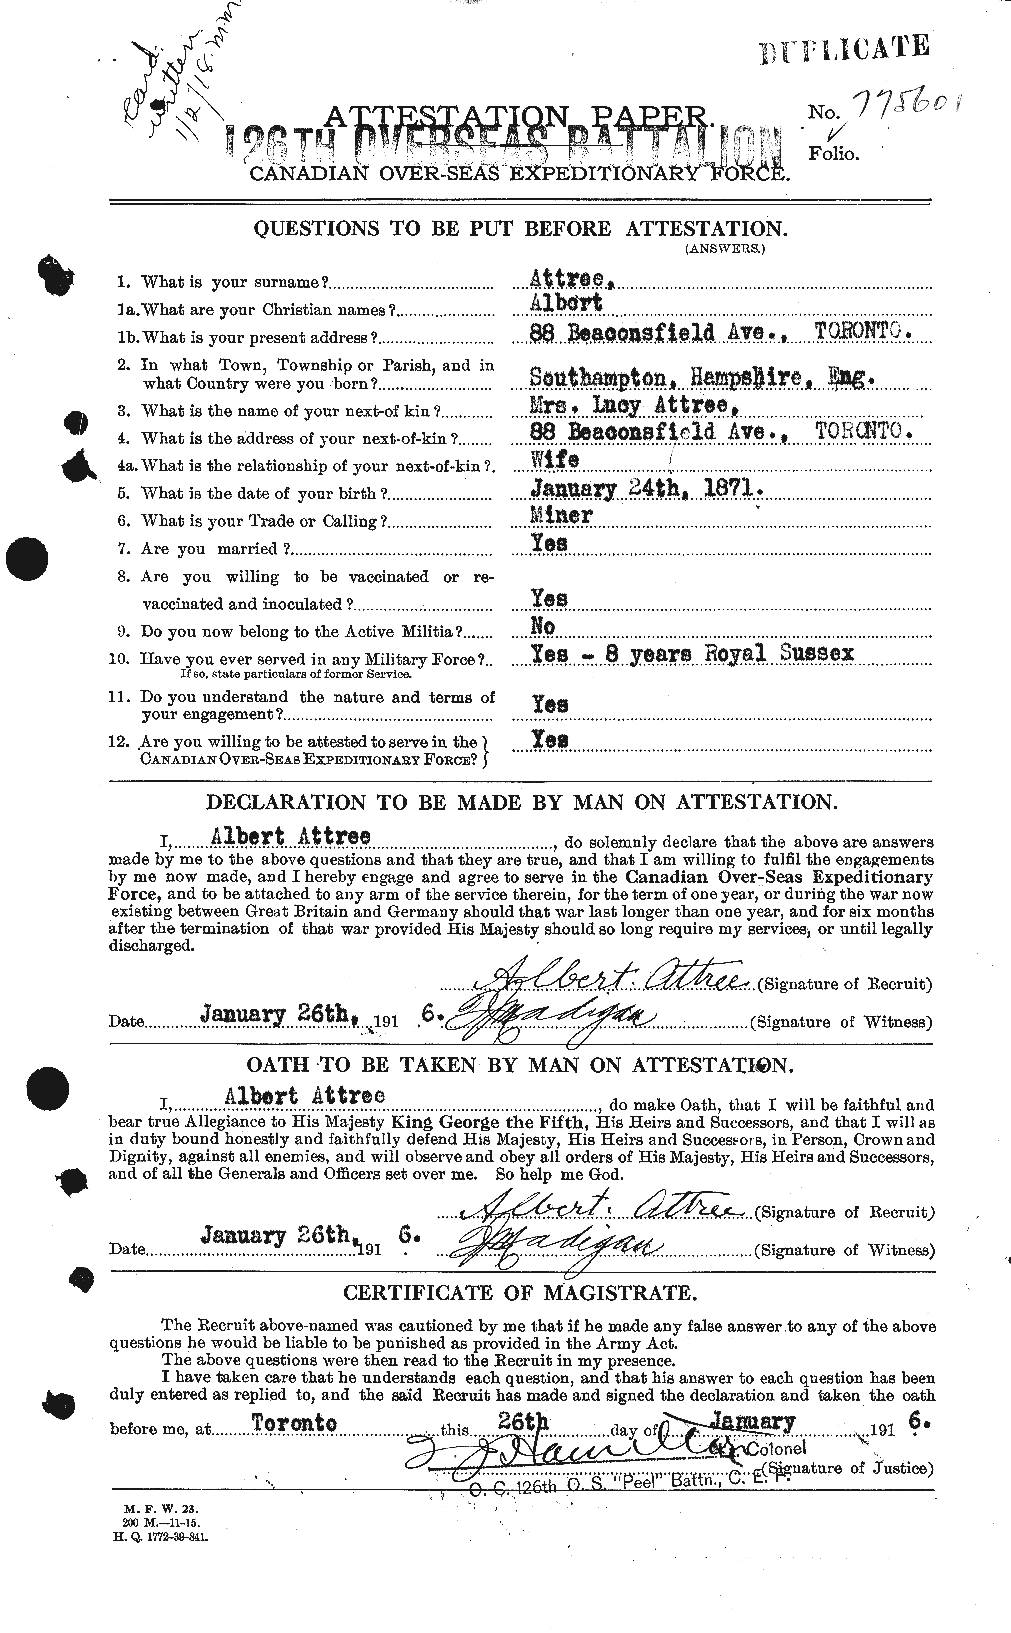 Personnel Records of the First World War - CEF 224079a